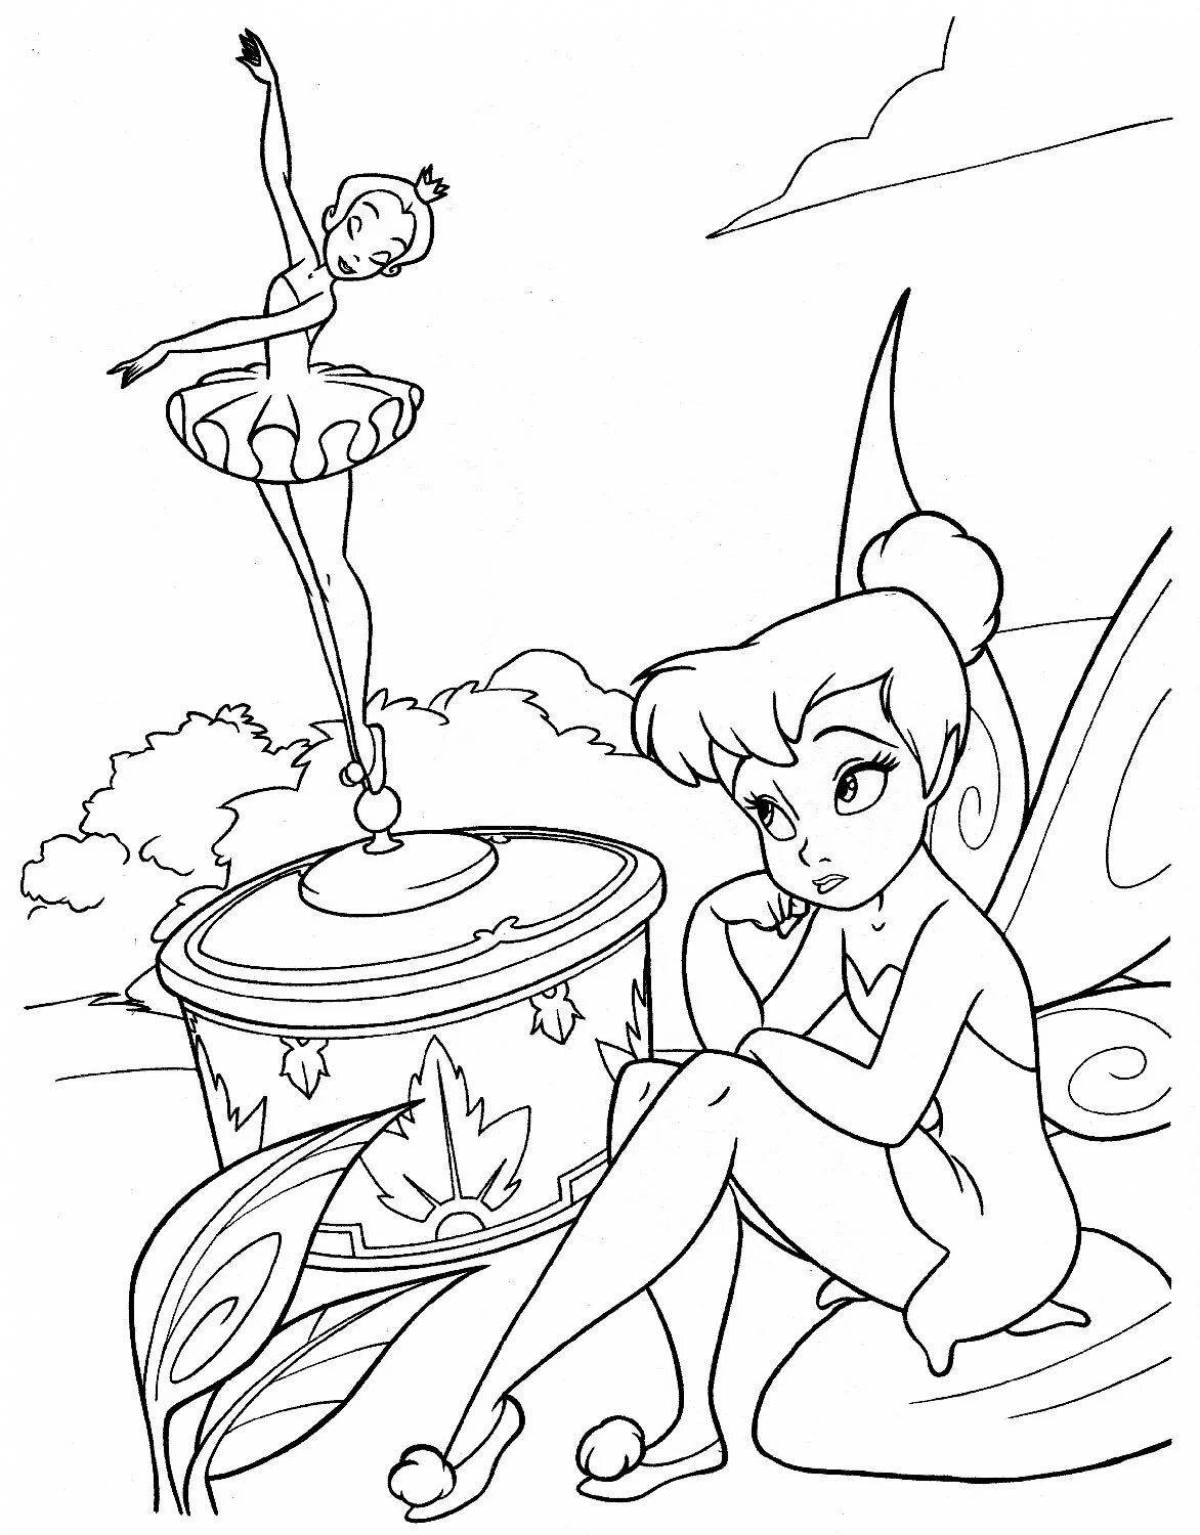 Amazing music box coloring page